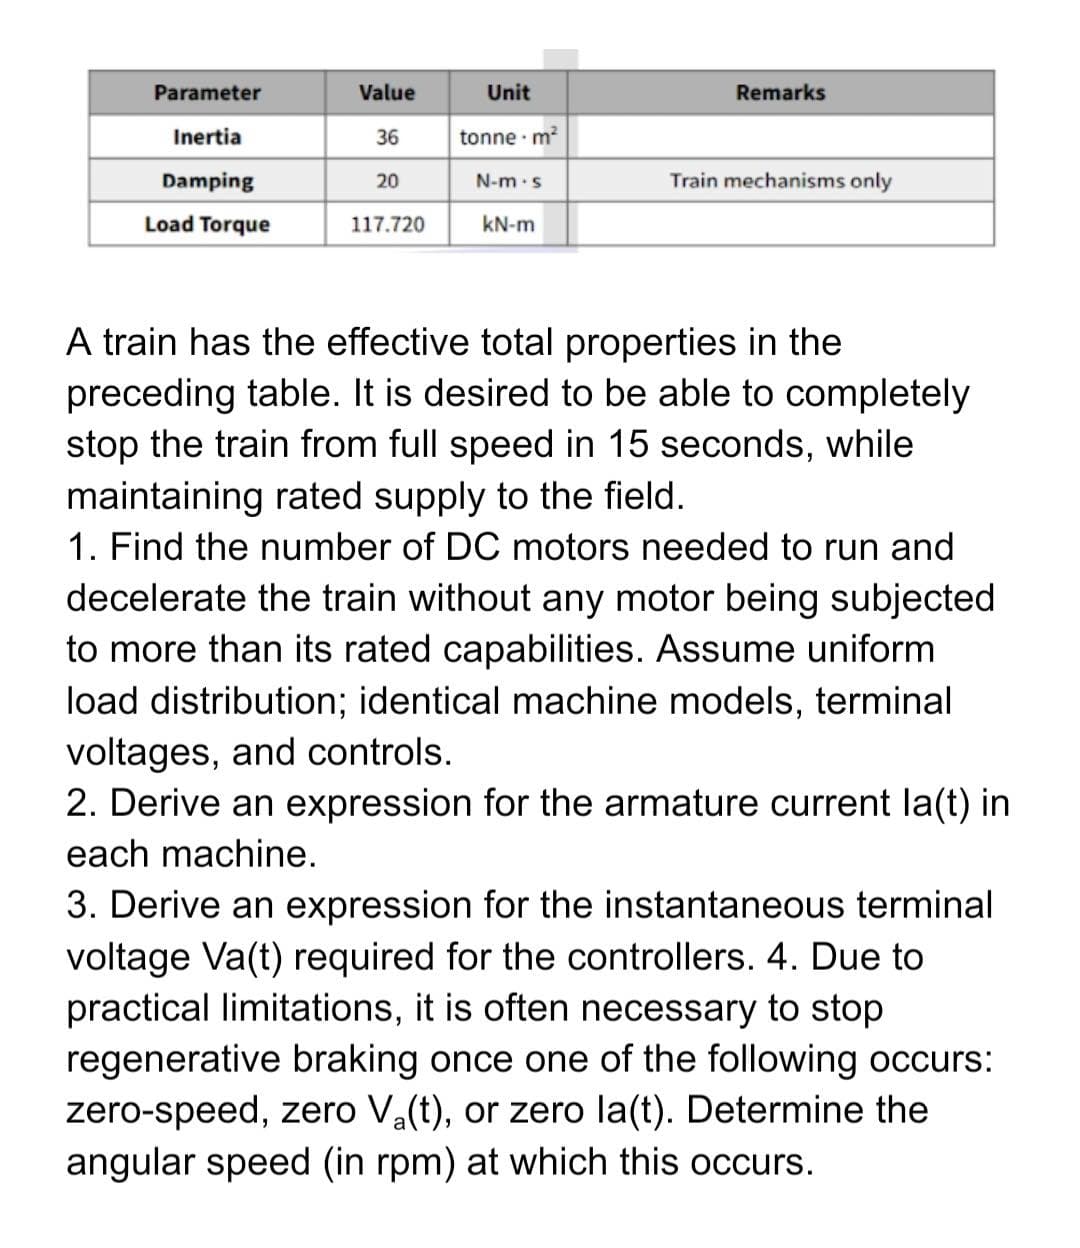 Parameter
Value
Unit
Remarks
Inertia
36
tonne m?
Damping
20
N-m.s
Train mechanisms only
Load Torque
117.720
kN-m
A train has the effective total properties in the
preceding table. It is desired to be able to completely
stop the train from full speed in 15 seconds, while
maintaining rated supply to the field.
1. Find the number of DC motors needed to run and
decelerate the train without any motor being subjected
to more than its rated capabilities. Assume uniform
load distribution; identical machine models, terminal
voltages, and controls.
2. Derive an expression for the armature current la(t) in
each machine.
3. Derive an expression for the instantaneous terminal
voltage Va(t) required for the controllers. 4. Due to
practical limitations, it is often necessary to stop
regenerative braking once one of the following occurs:
zero-speed, zero Va(t), or zero la(t). Determine the
angular speed (in rpm) at which this occurs.
